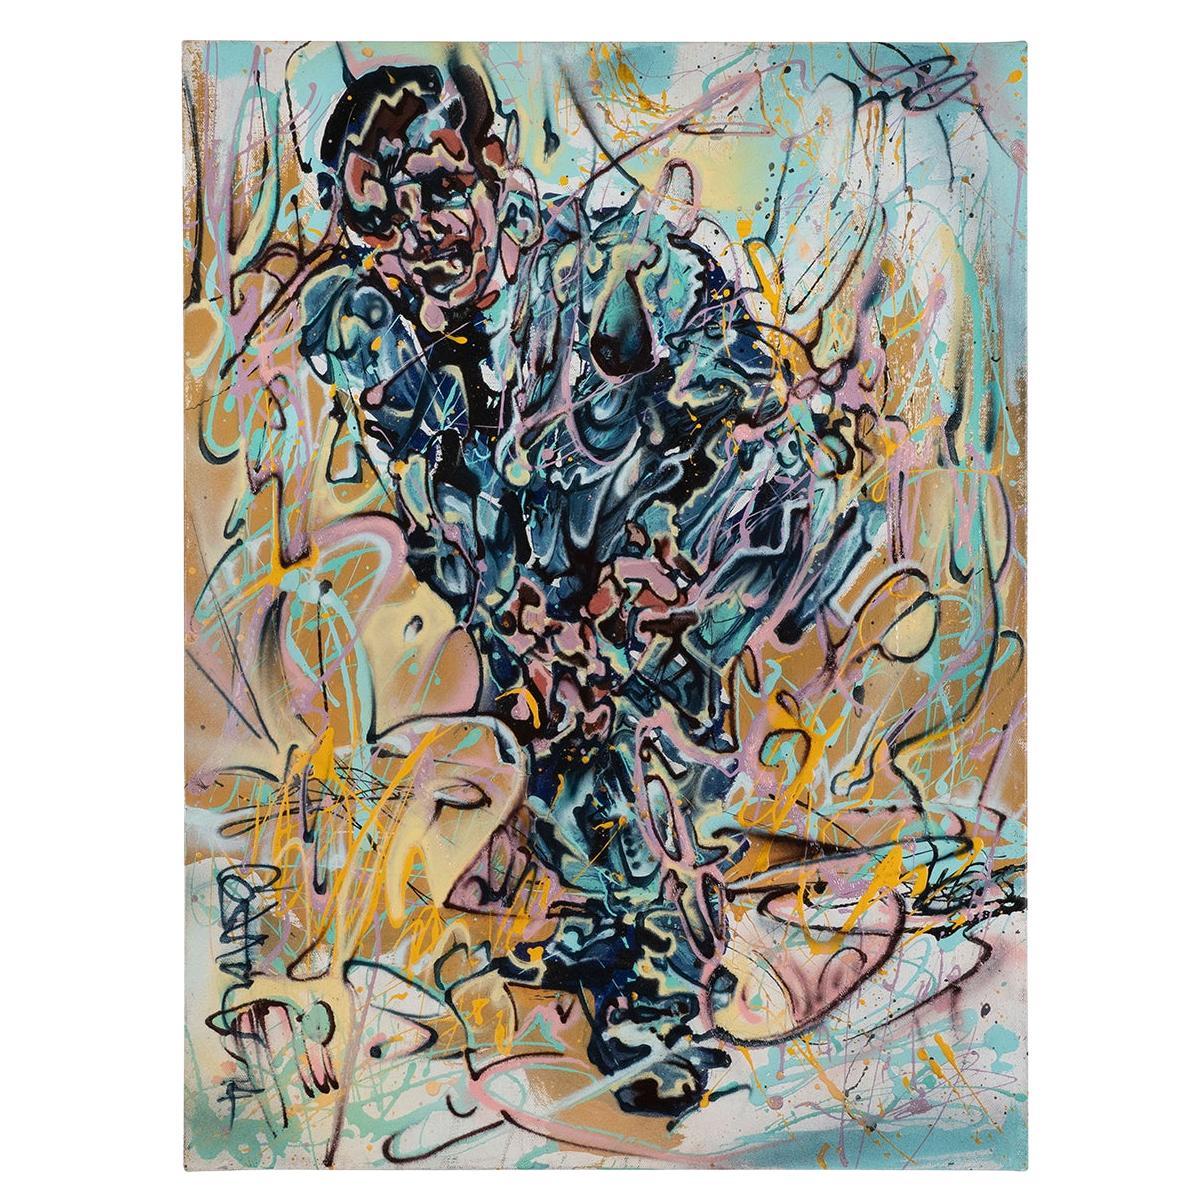 Modern Impressionistic Portrait of Man in Suit by Costain